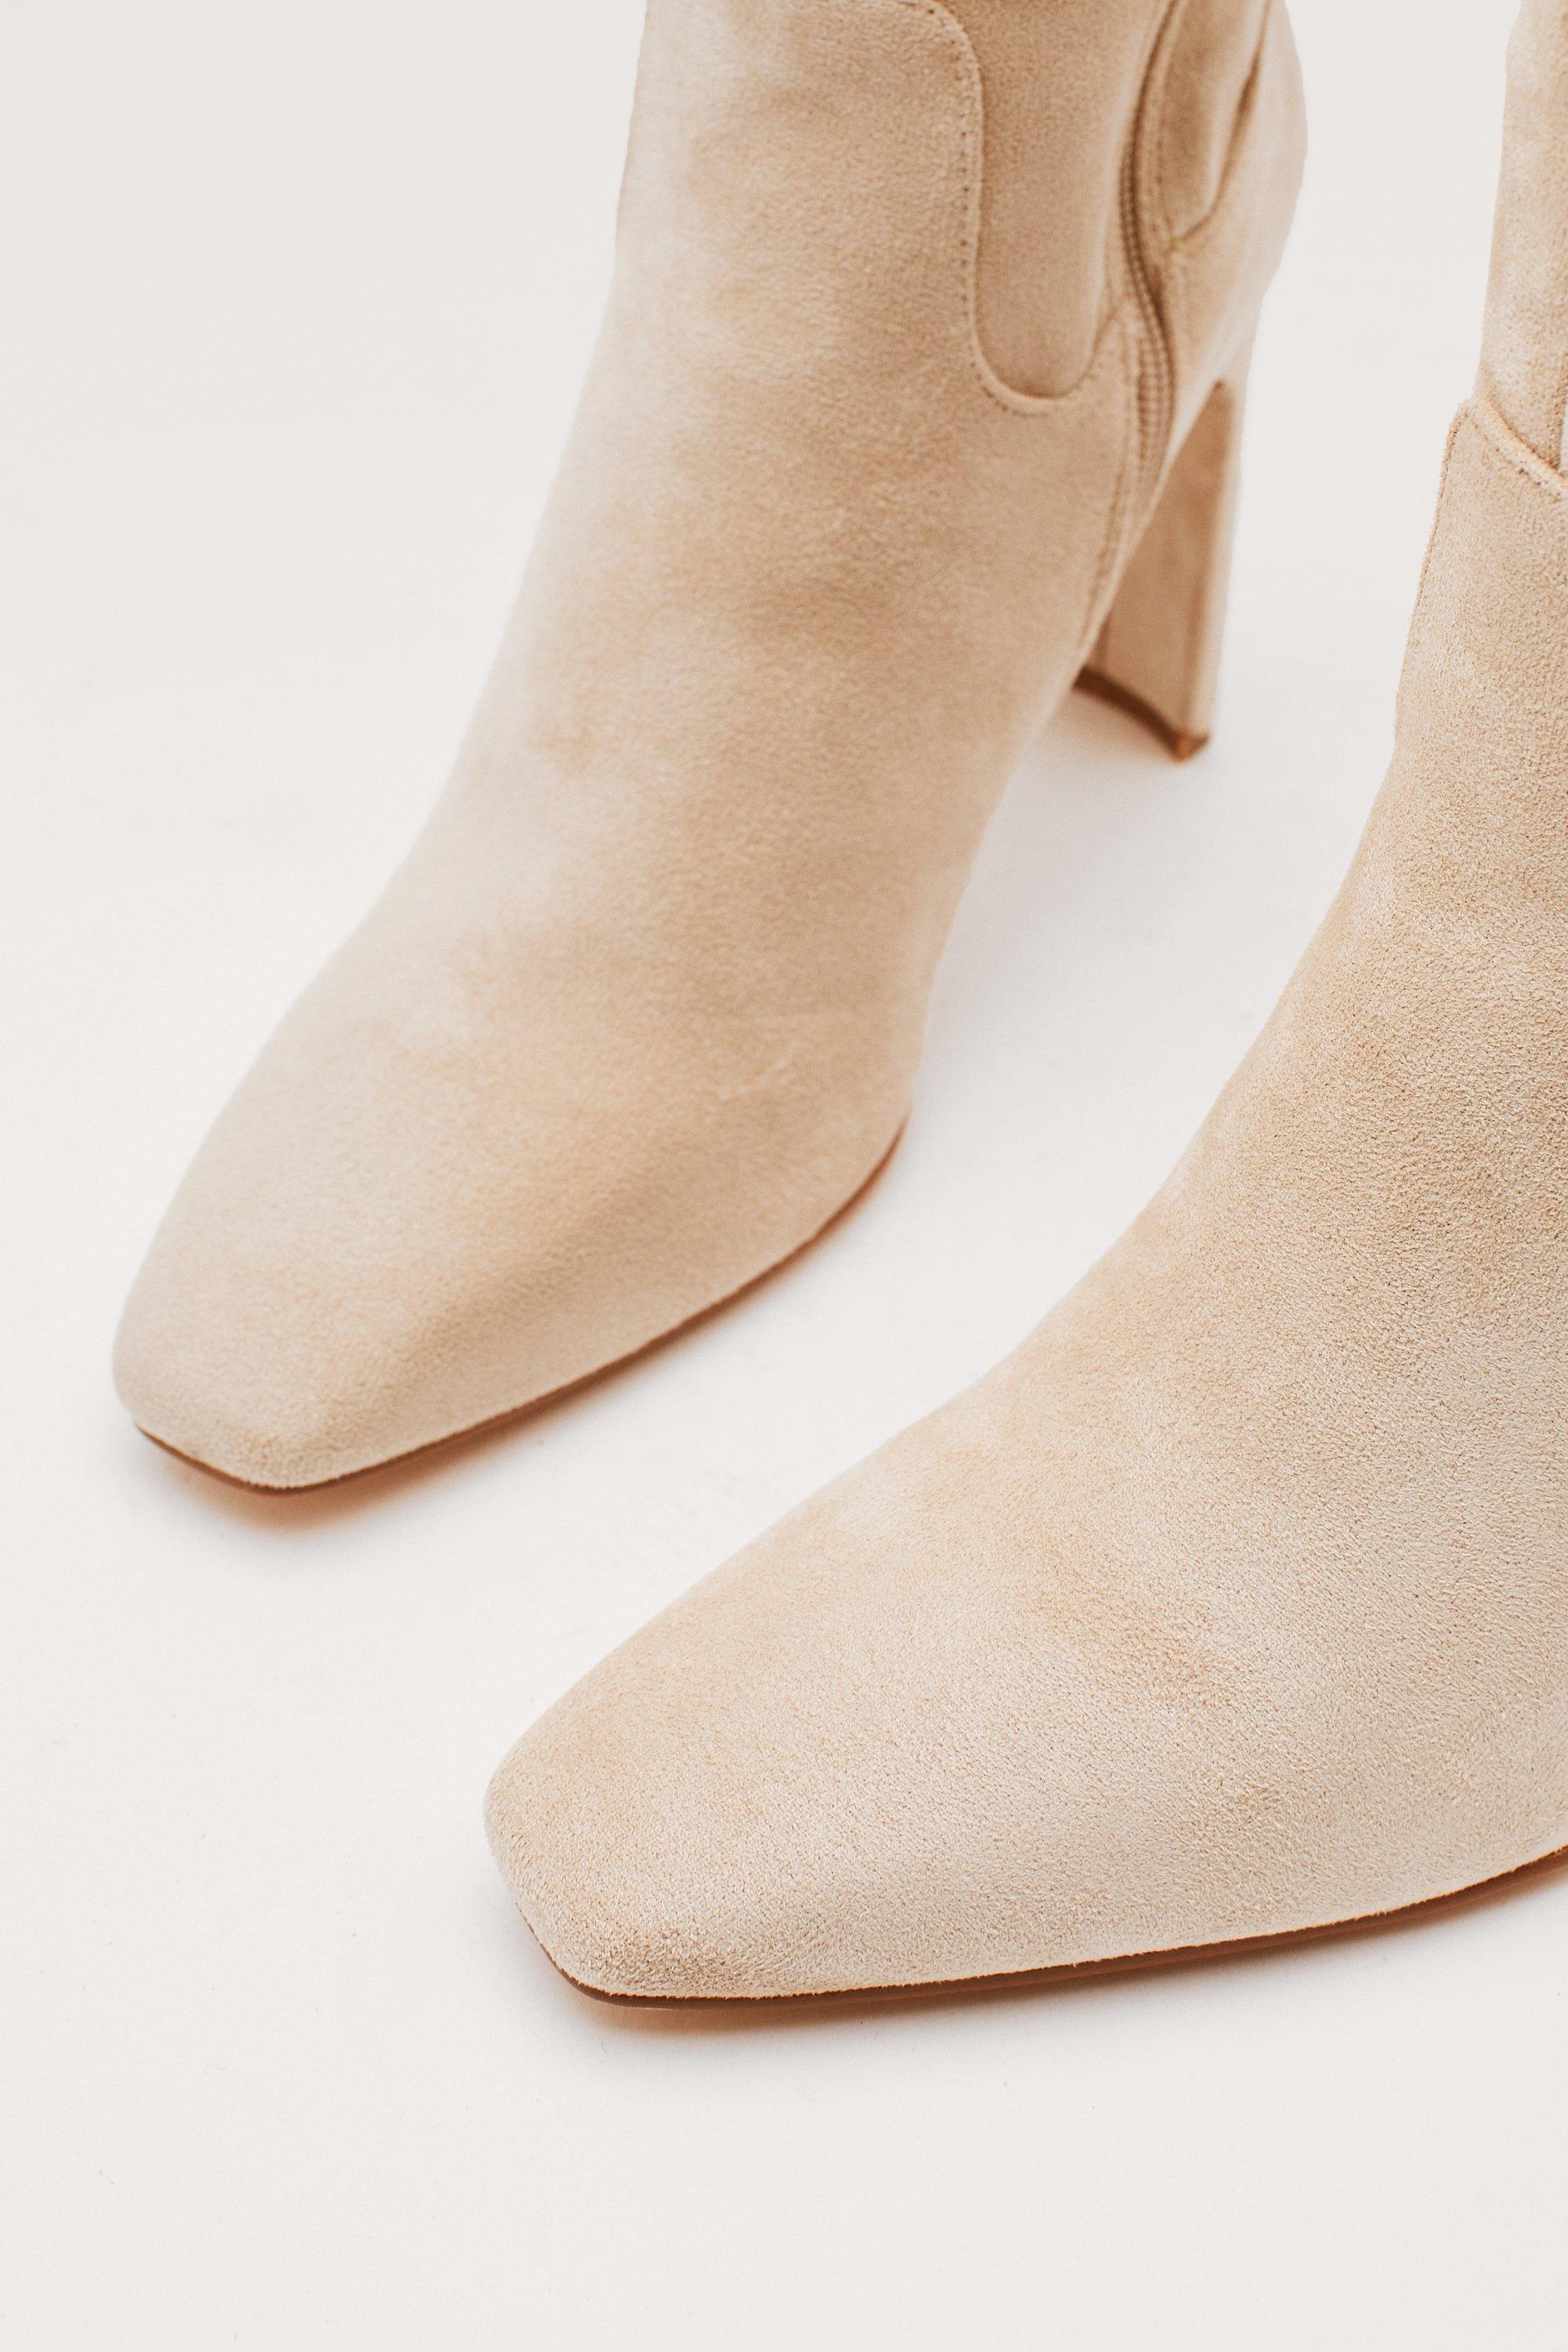 rangle Skulle Stor eg Faux Suede Heeled Calf Boots | Nasty Gal